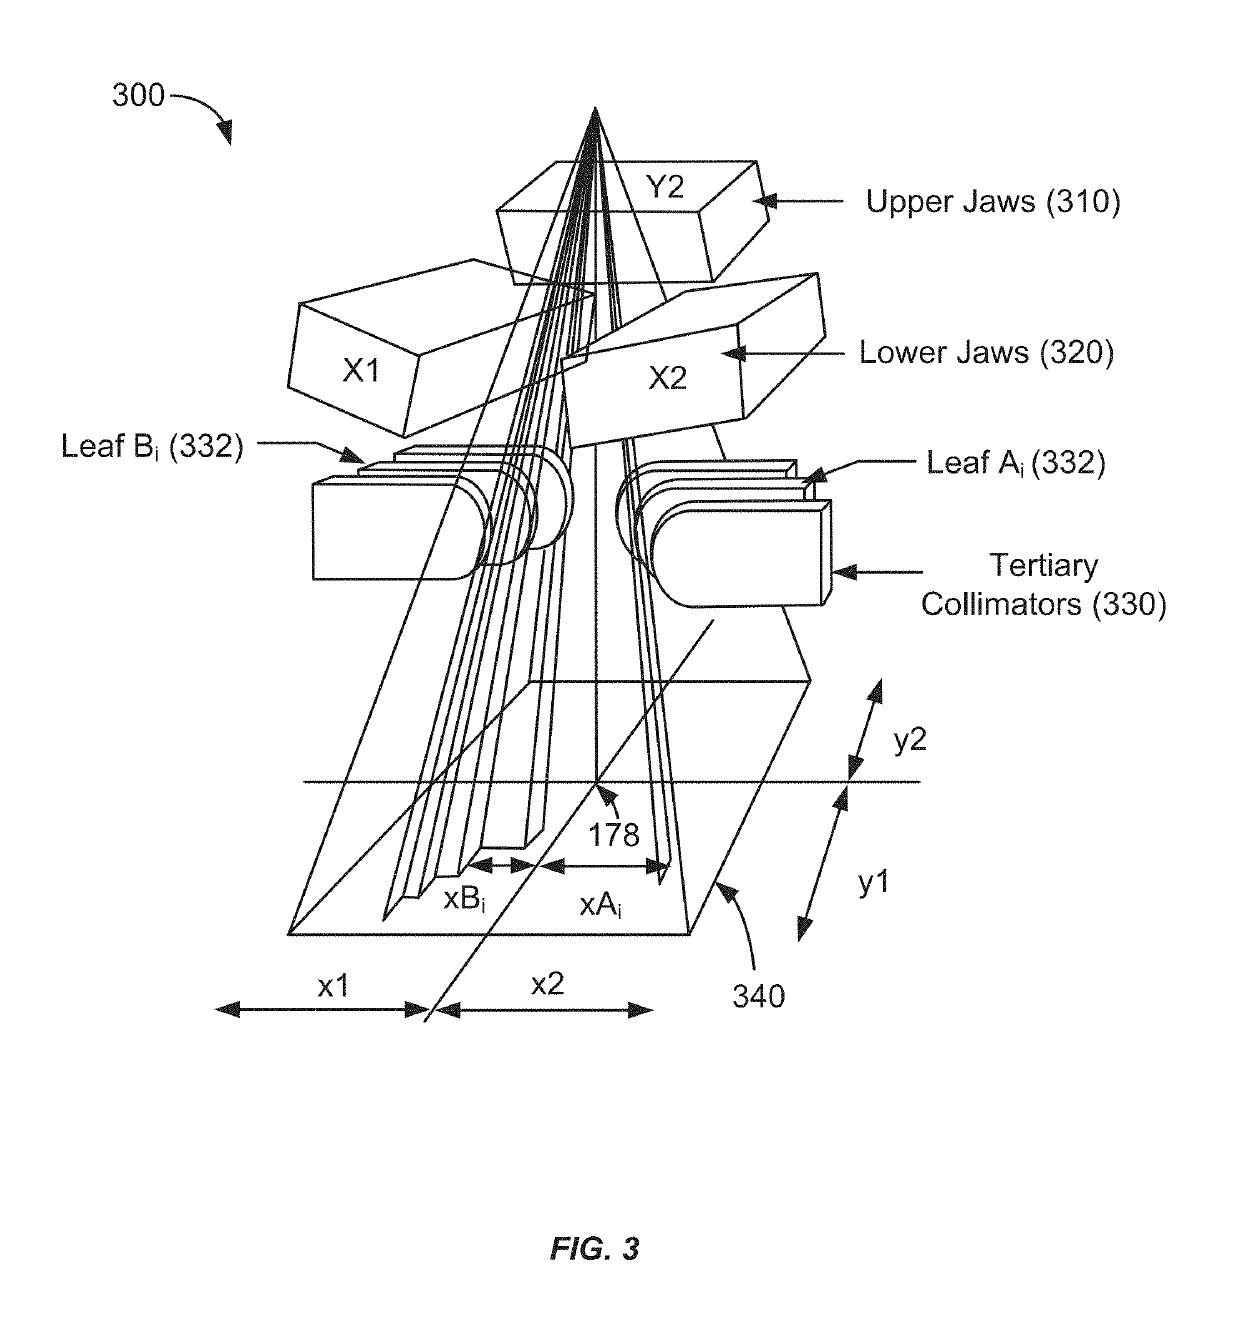 Generating time-efficient treatment field trajectories for external-beam radiation treatments